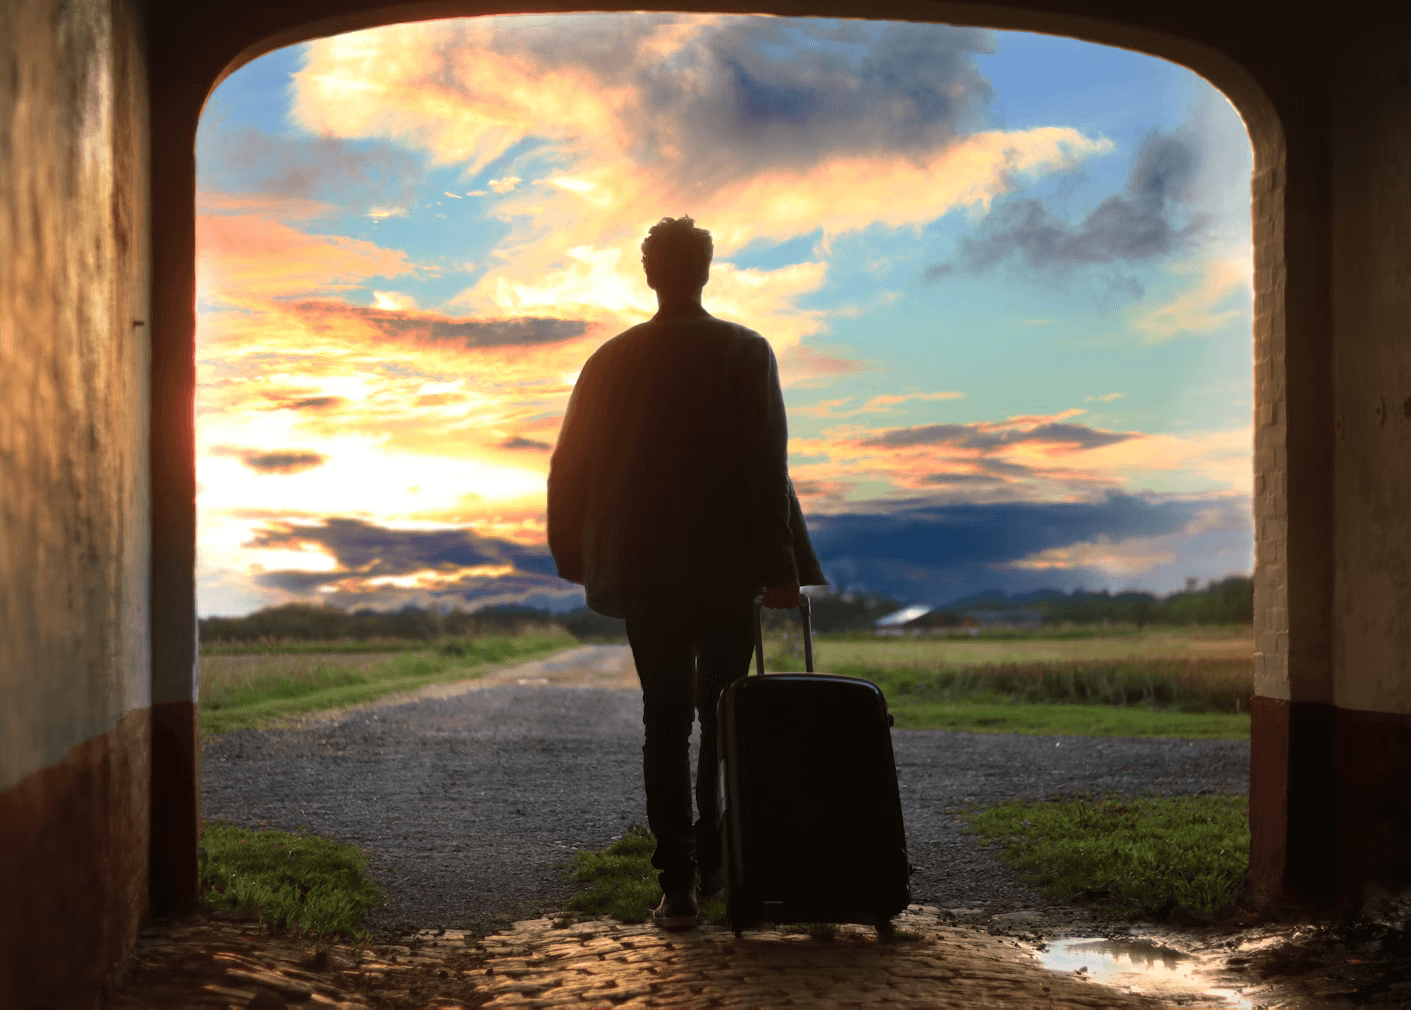 Beginner's Guide to Solo Travel - A man with a suitcase going out for solo travel